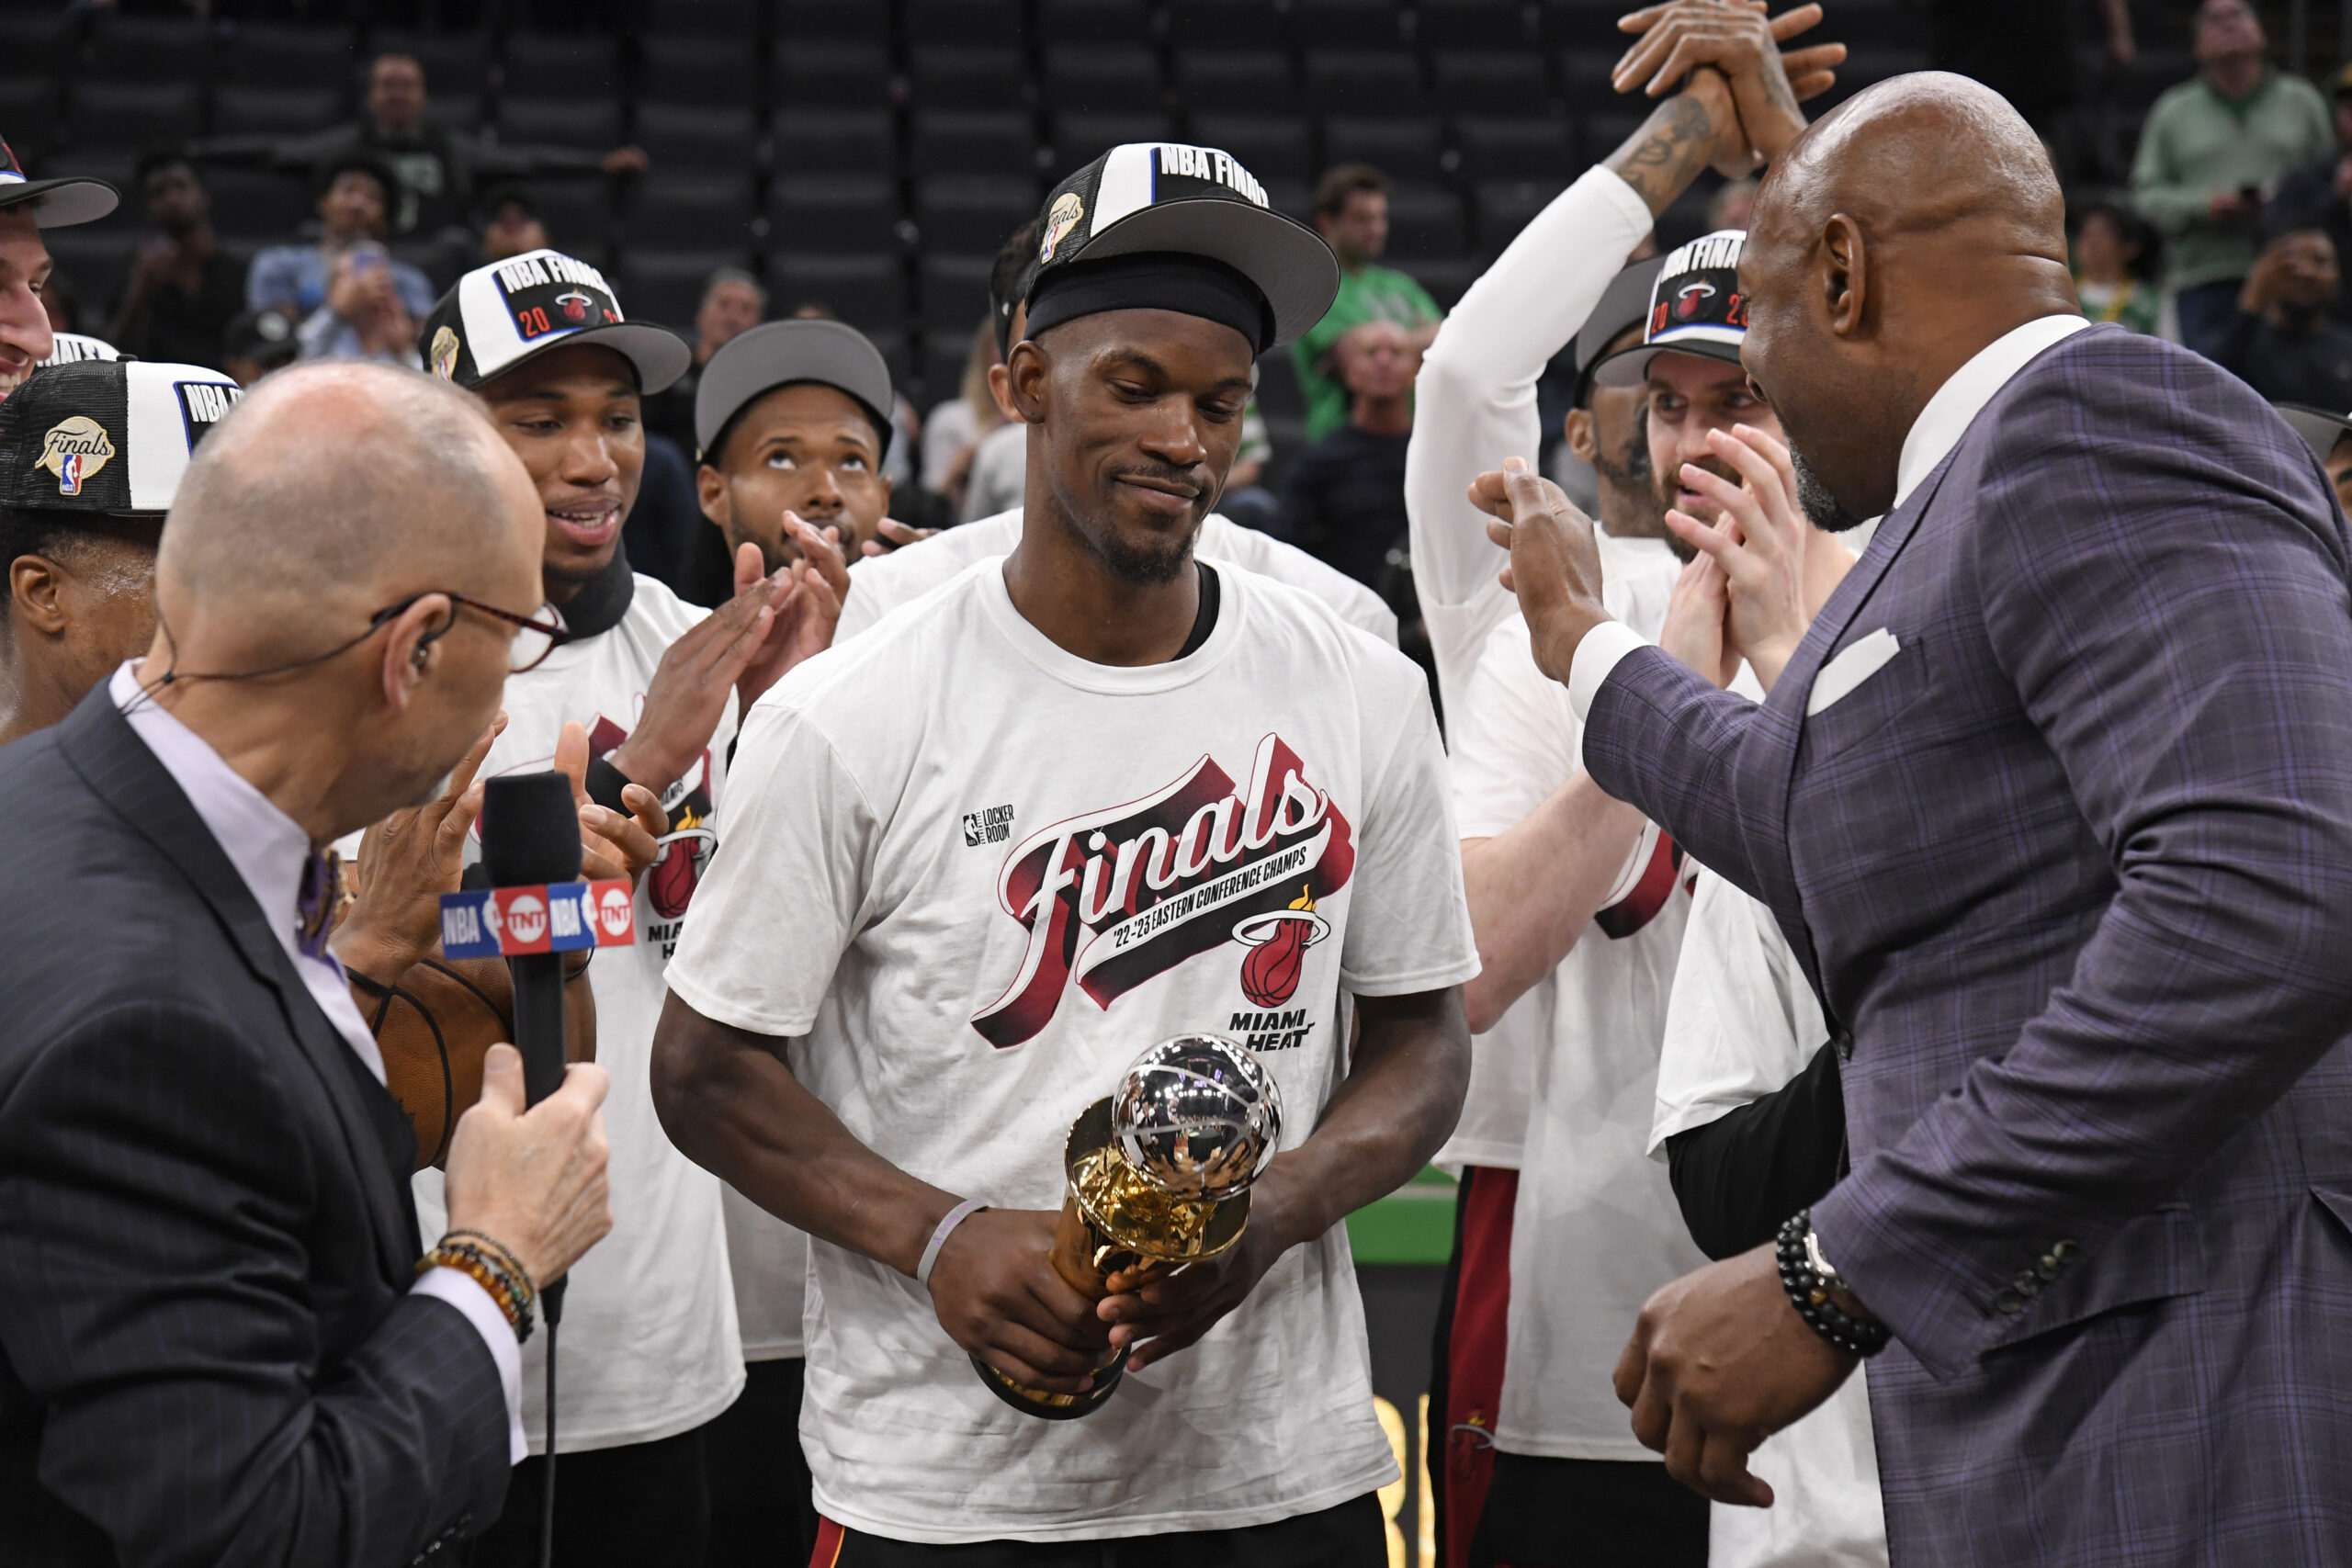 BOSTON, MA - MAY 29: Jimmy Butler #22 of the Miami Heat is presented with the Larry Bird Trophy after winning  round 3 game 7 of the Eastern Conference finals 2023 NBA Playoffs on May 29, 2023 at the TD Garden in Boston, Massachusetts. NOTE TO USER: User expressly acknowledges and agrees that, by downloading and or using this photograph, User is consenting to the terms and conditions of the Getty Images License Agreement. Mandatory Copyright Notice: Copyright 2023 NBAE  (Photo by Brian Babineau/NBAE via Getty Images)